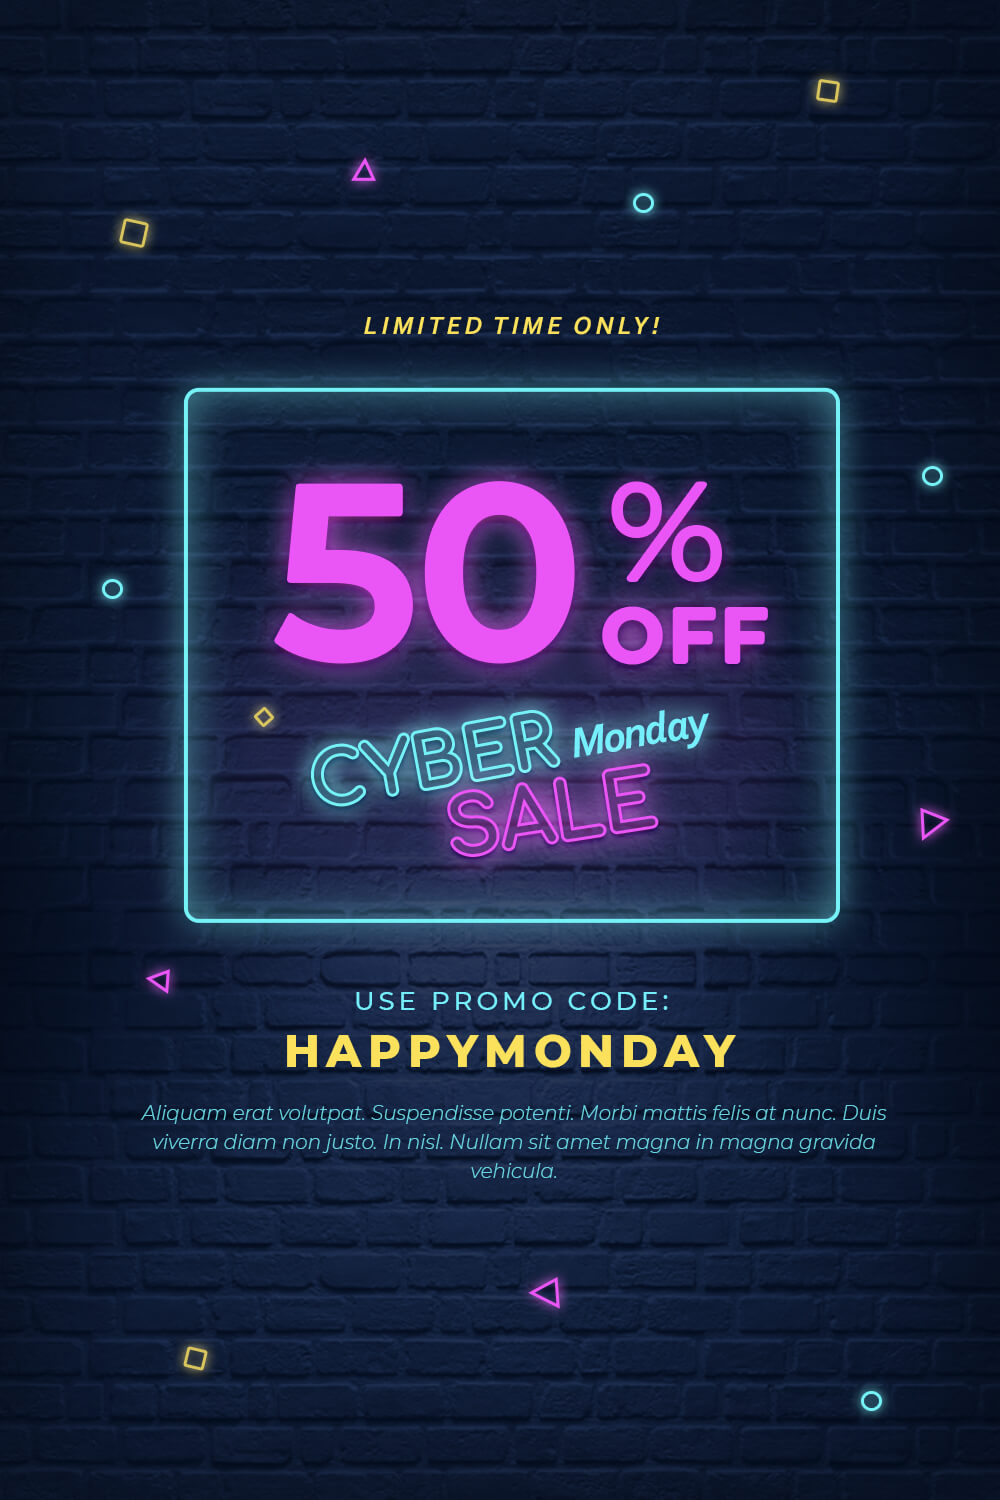 Free Cyber Monday Sale 50% OFF Banners pinterest image.